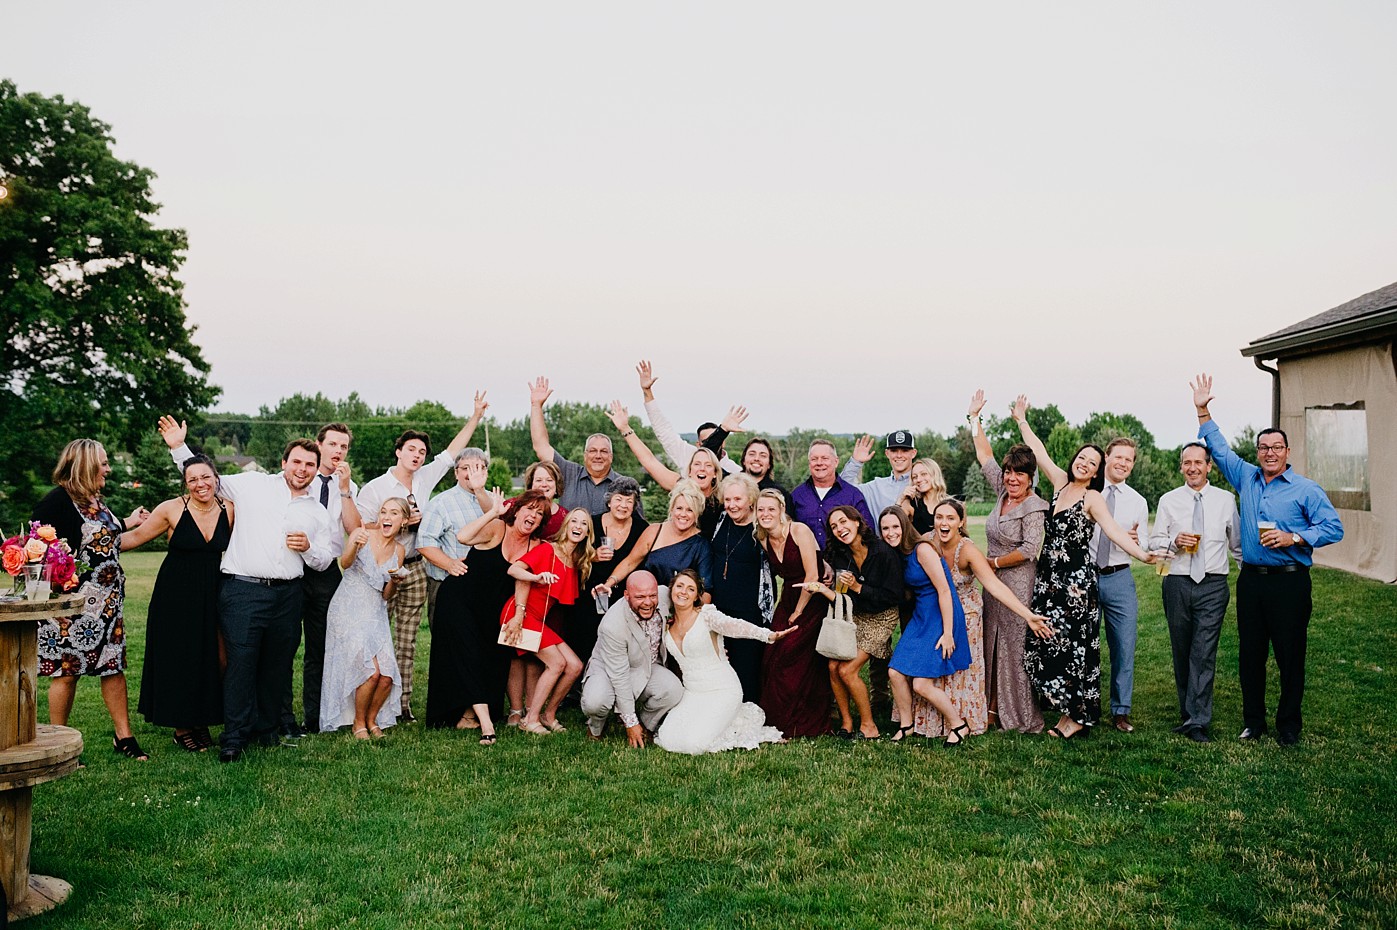 Anna & Reggie's Birchview outdoor wedding this summer was So-MUCH-FUN! Guys, the field, the barn, the colors, the smiles, the everything made their day exactly the way they wanted it to be.